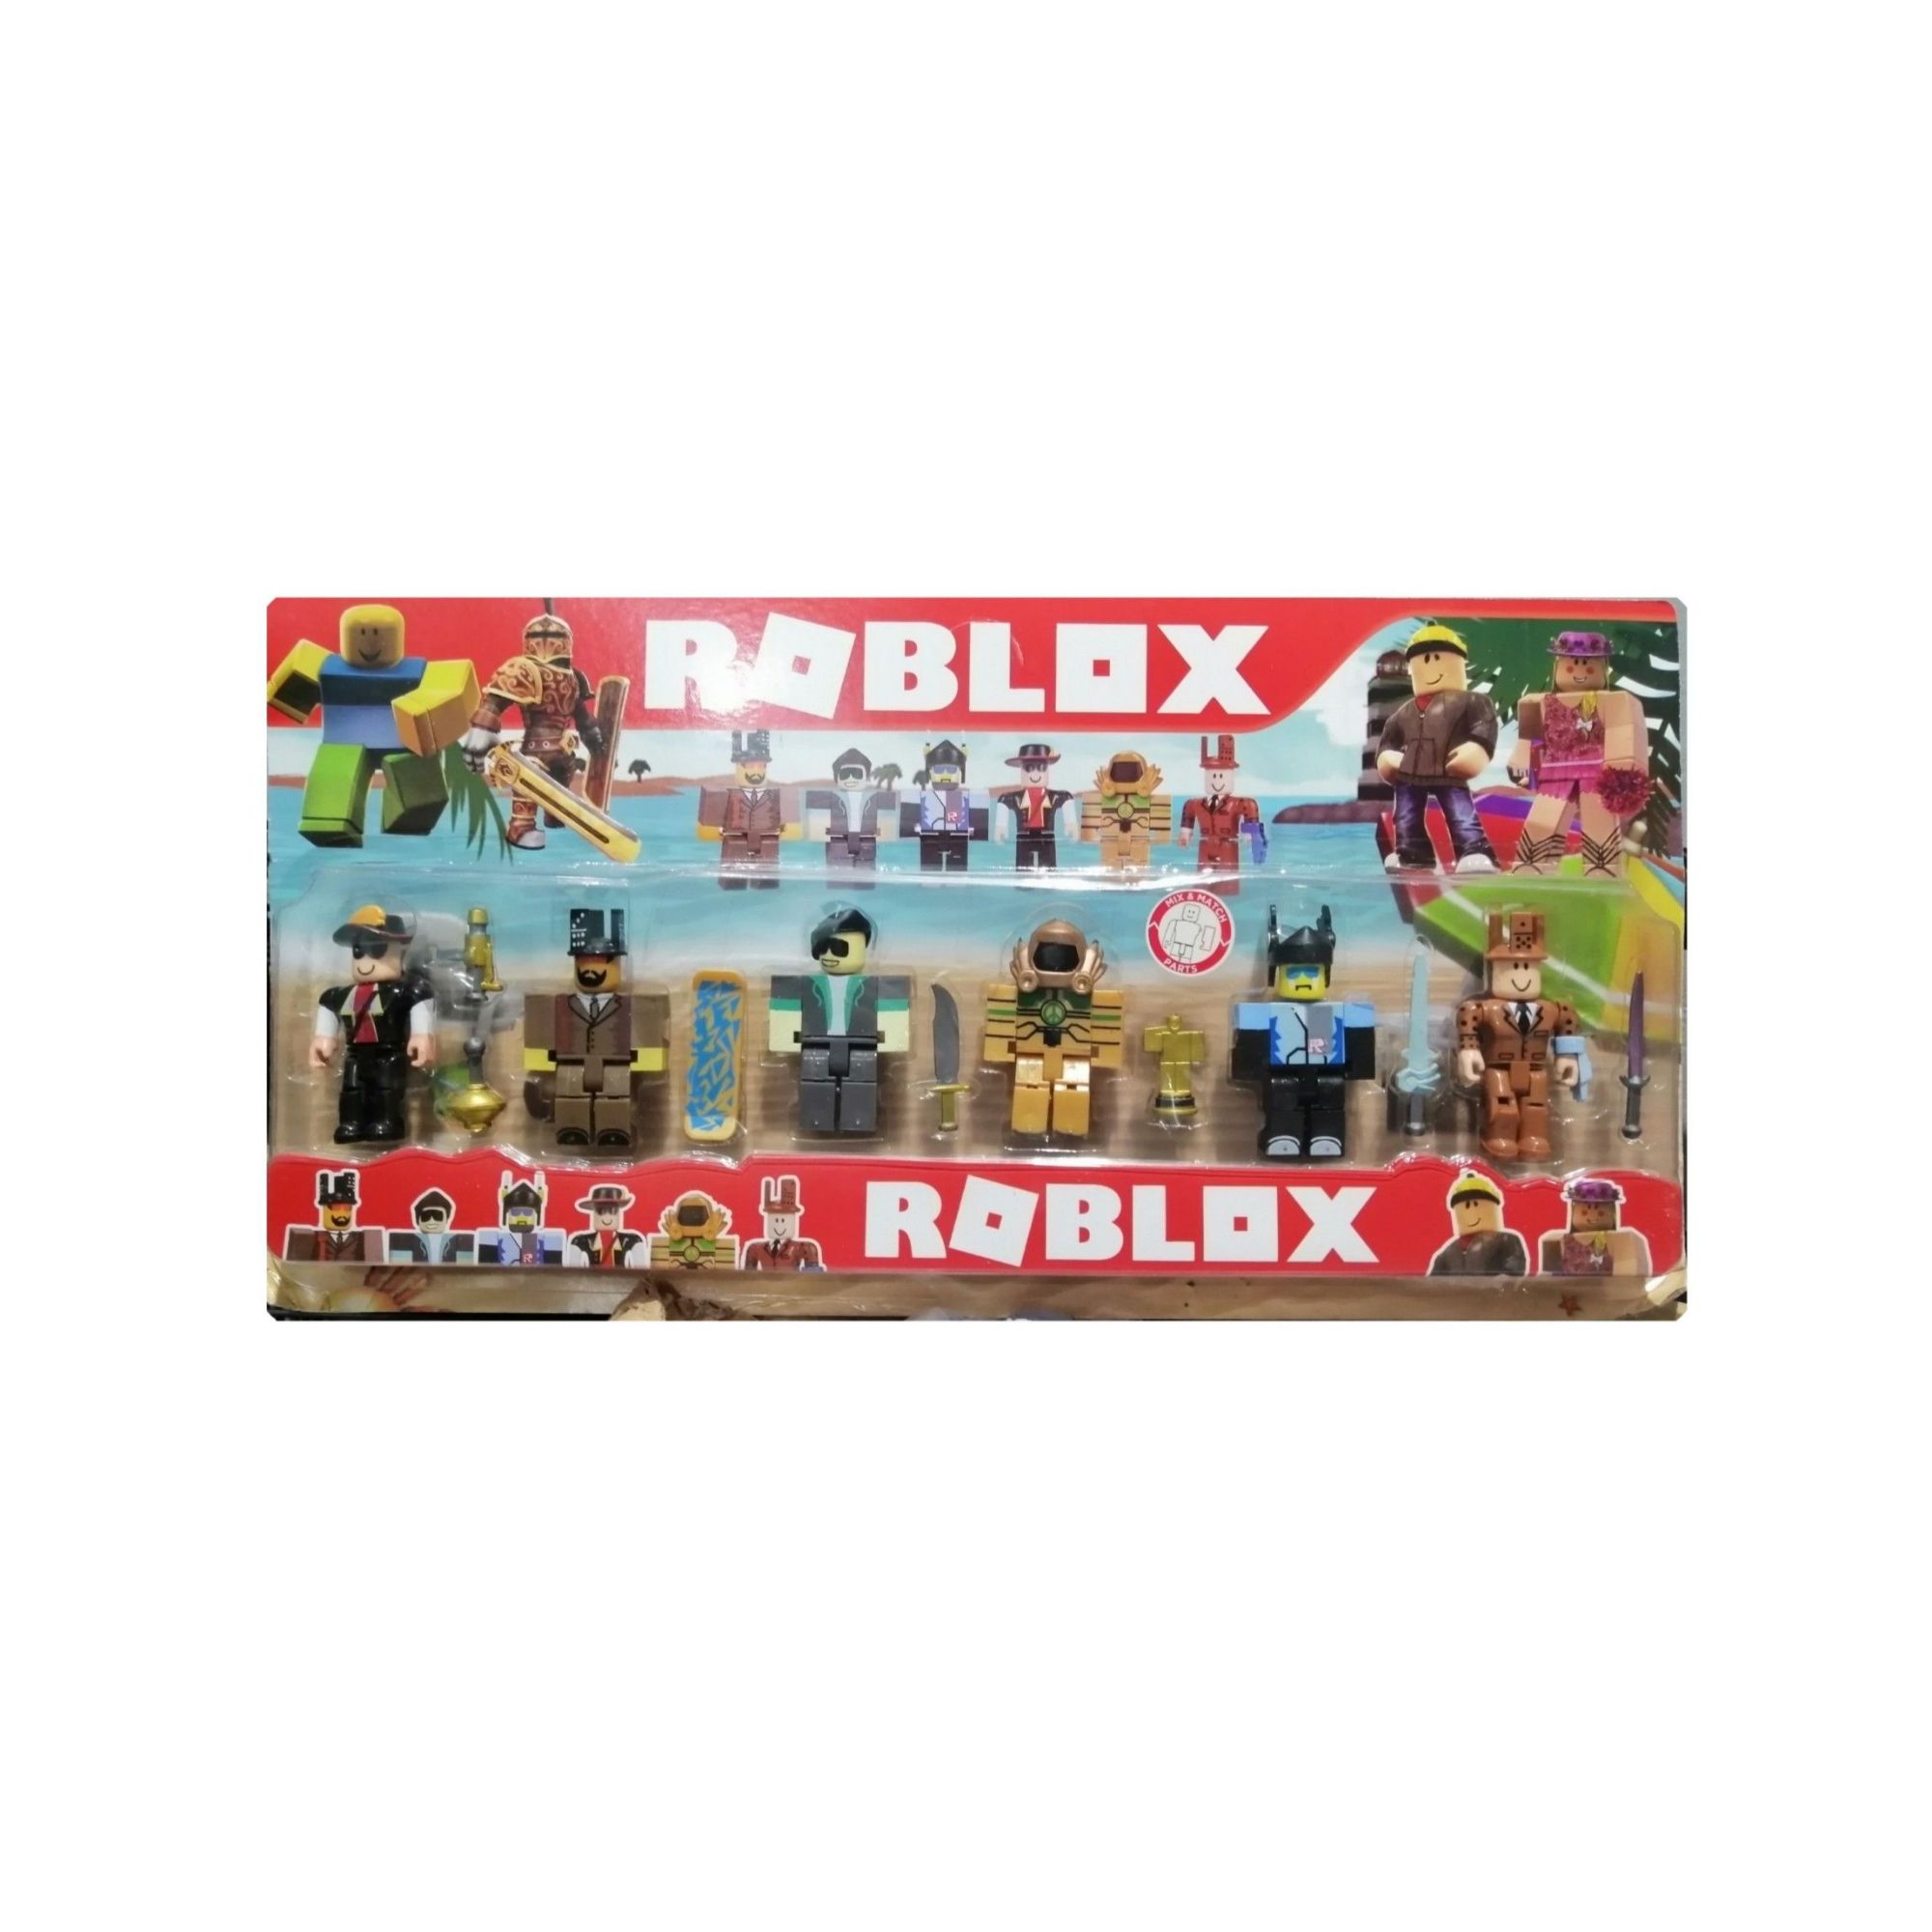 Legends Of Roblox 6 Pcs Buy Sell Online Collectibles With Cheap Price Lazada Ph - brandnew 6pcs legend of roblox with weapons and skateboard